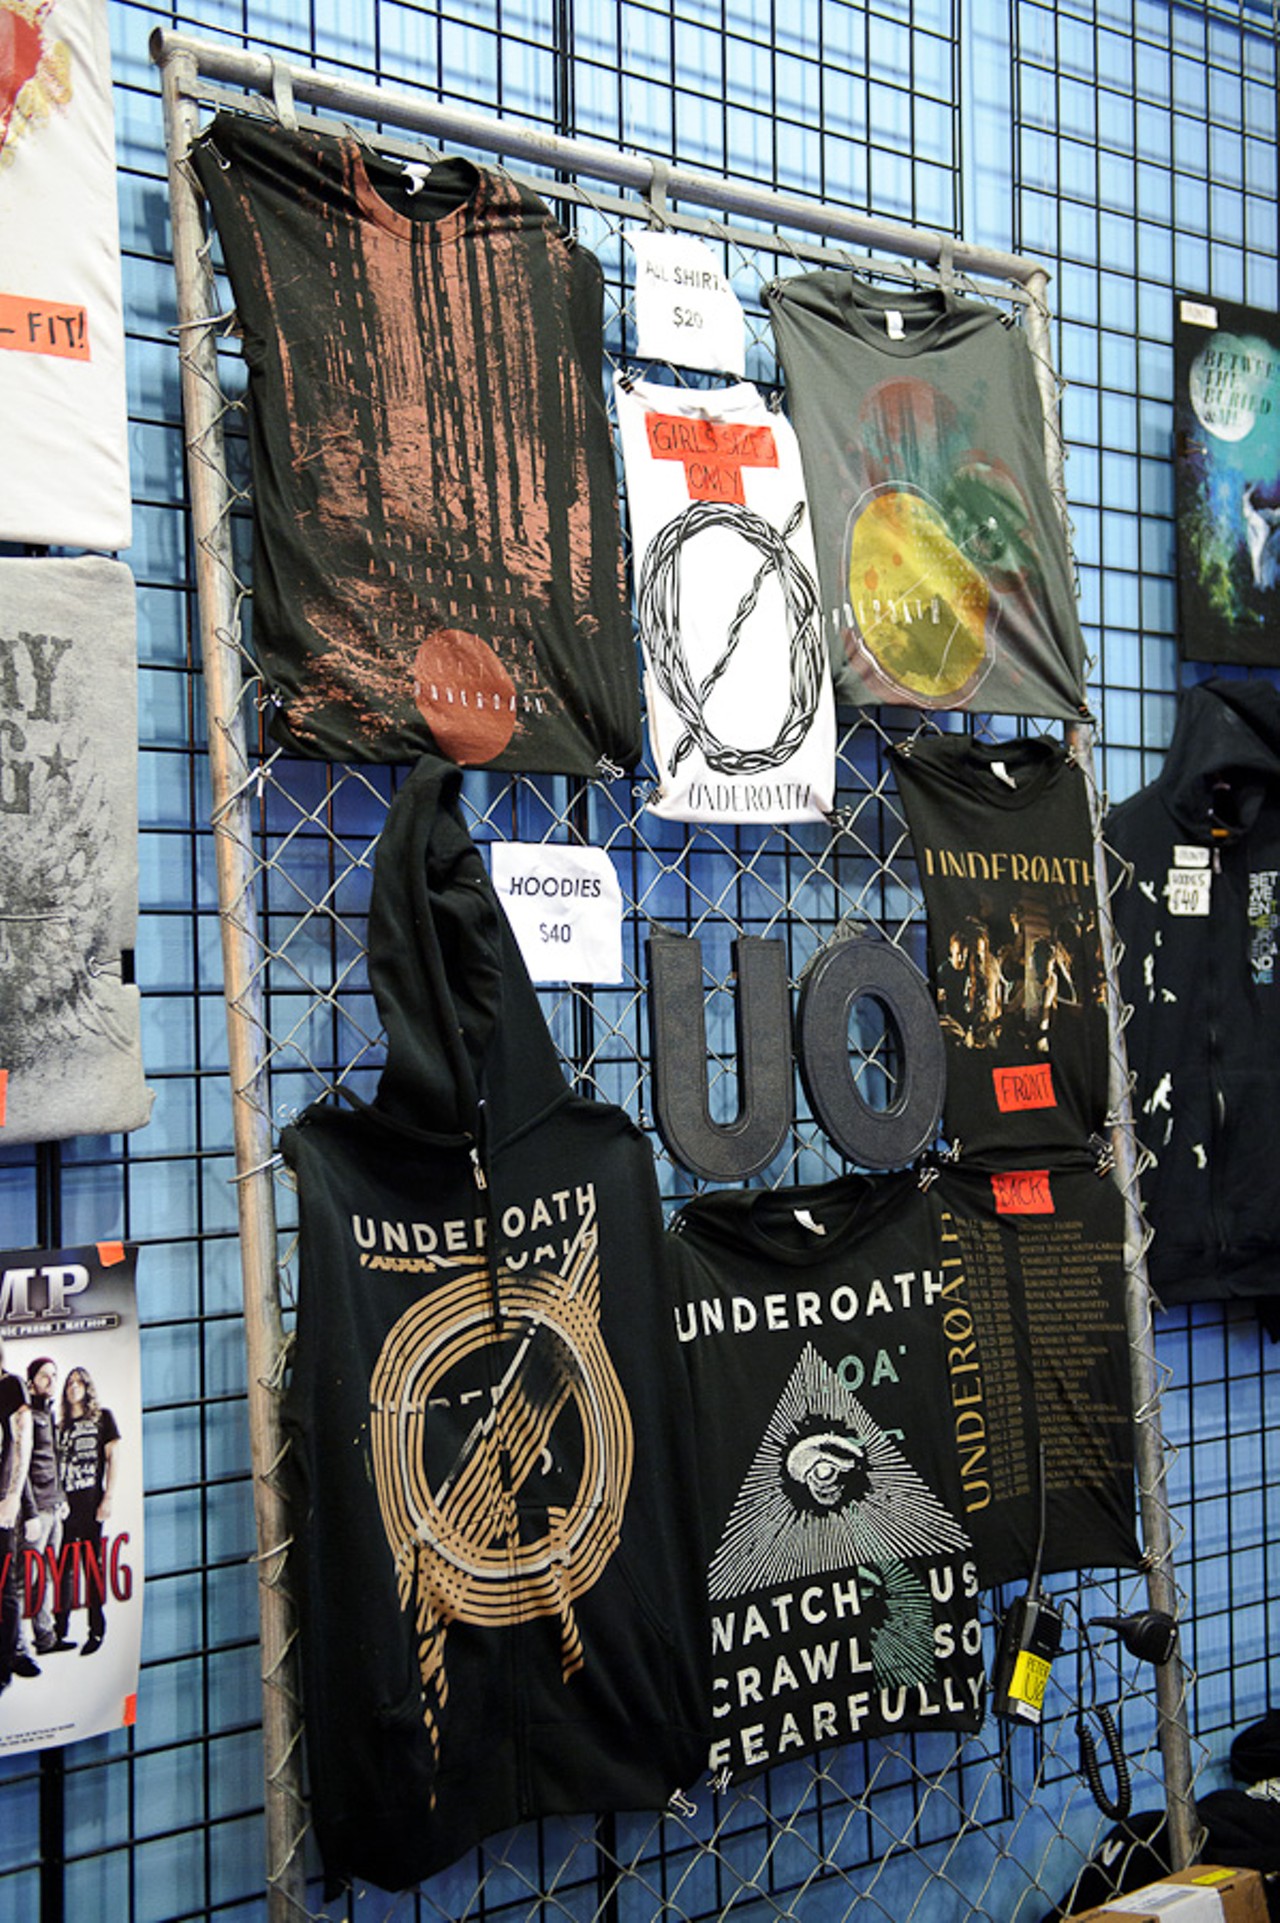 Underoath gear at The Pageant in St. Louis, part of the 2010 Cool Tour.